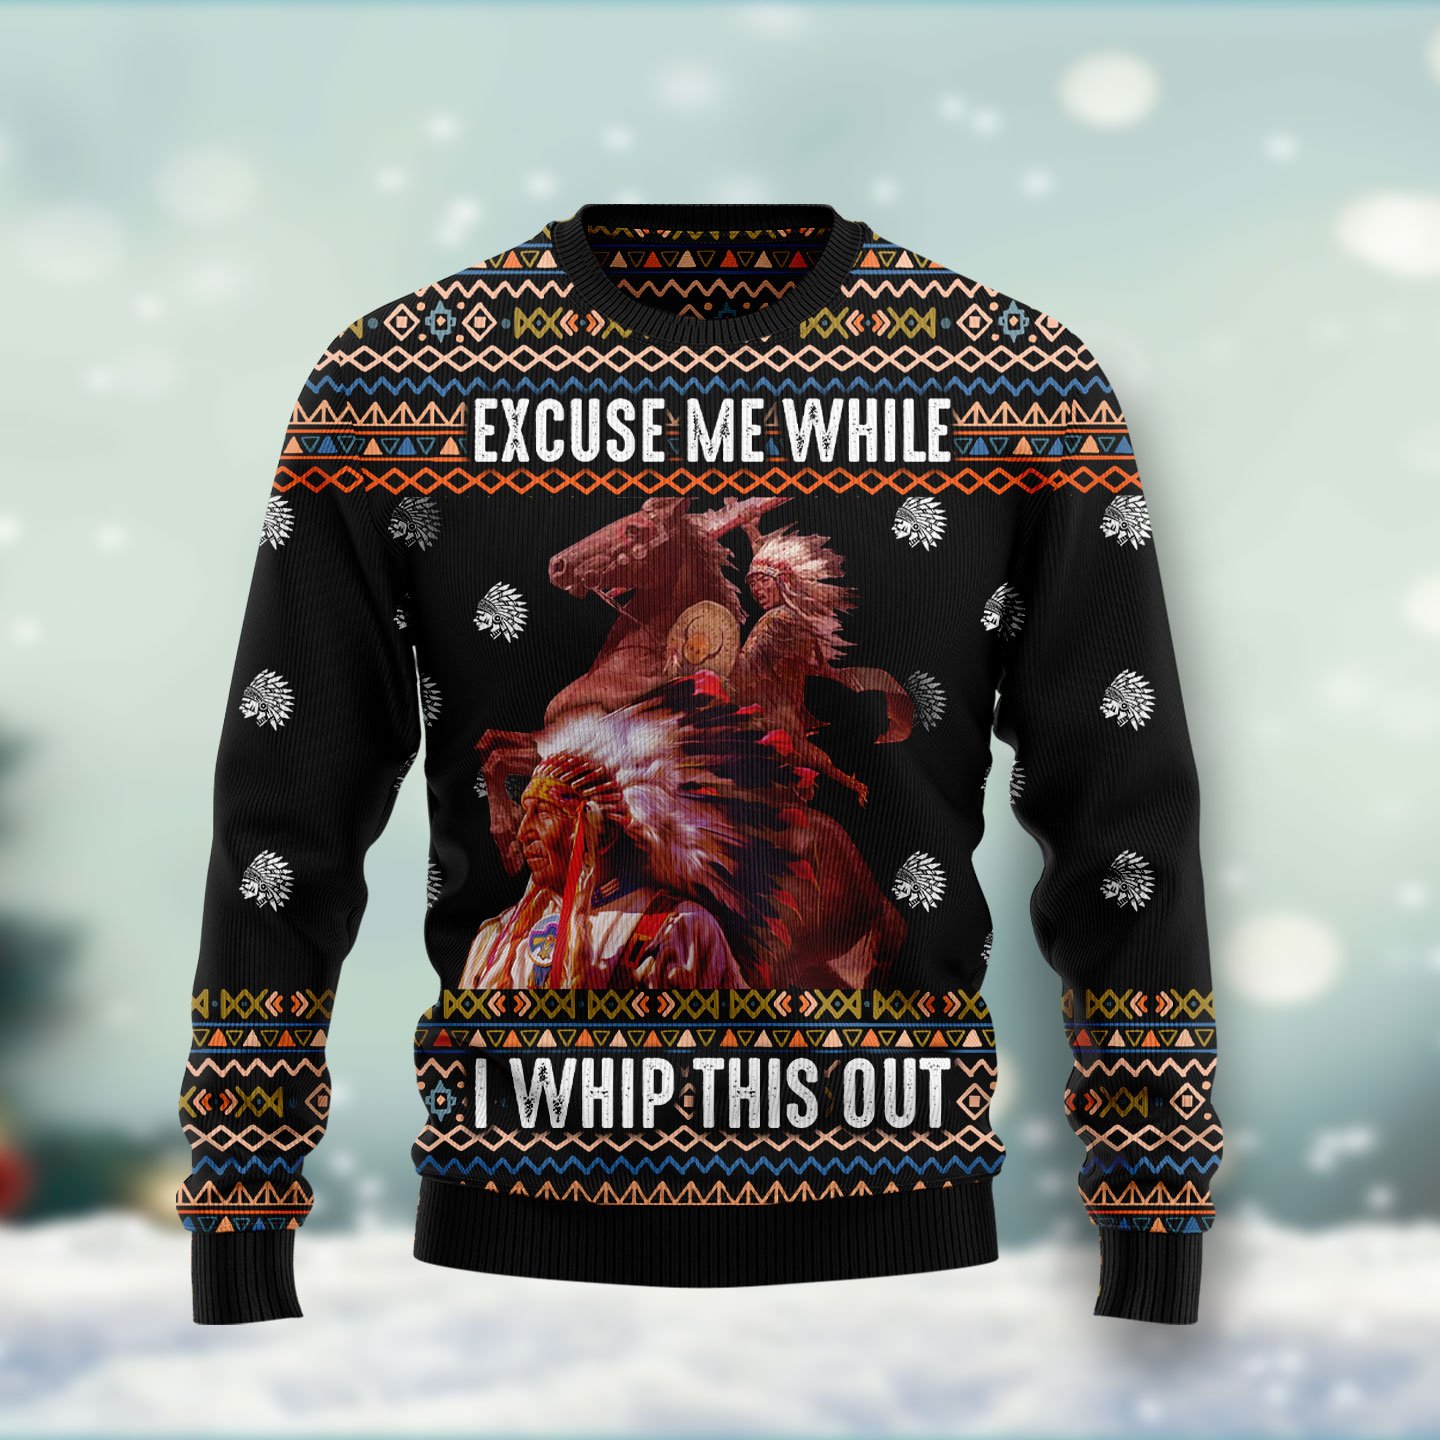 Native Excuse Me While I Whip This Out Ht102601 Ugly Christmas Sweater